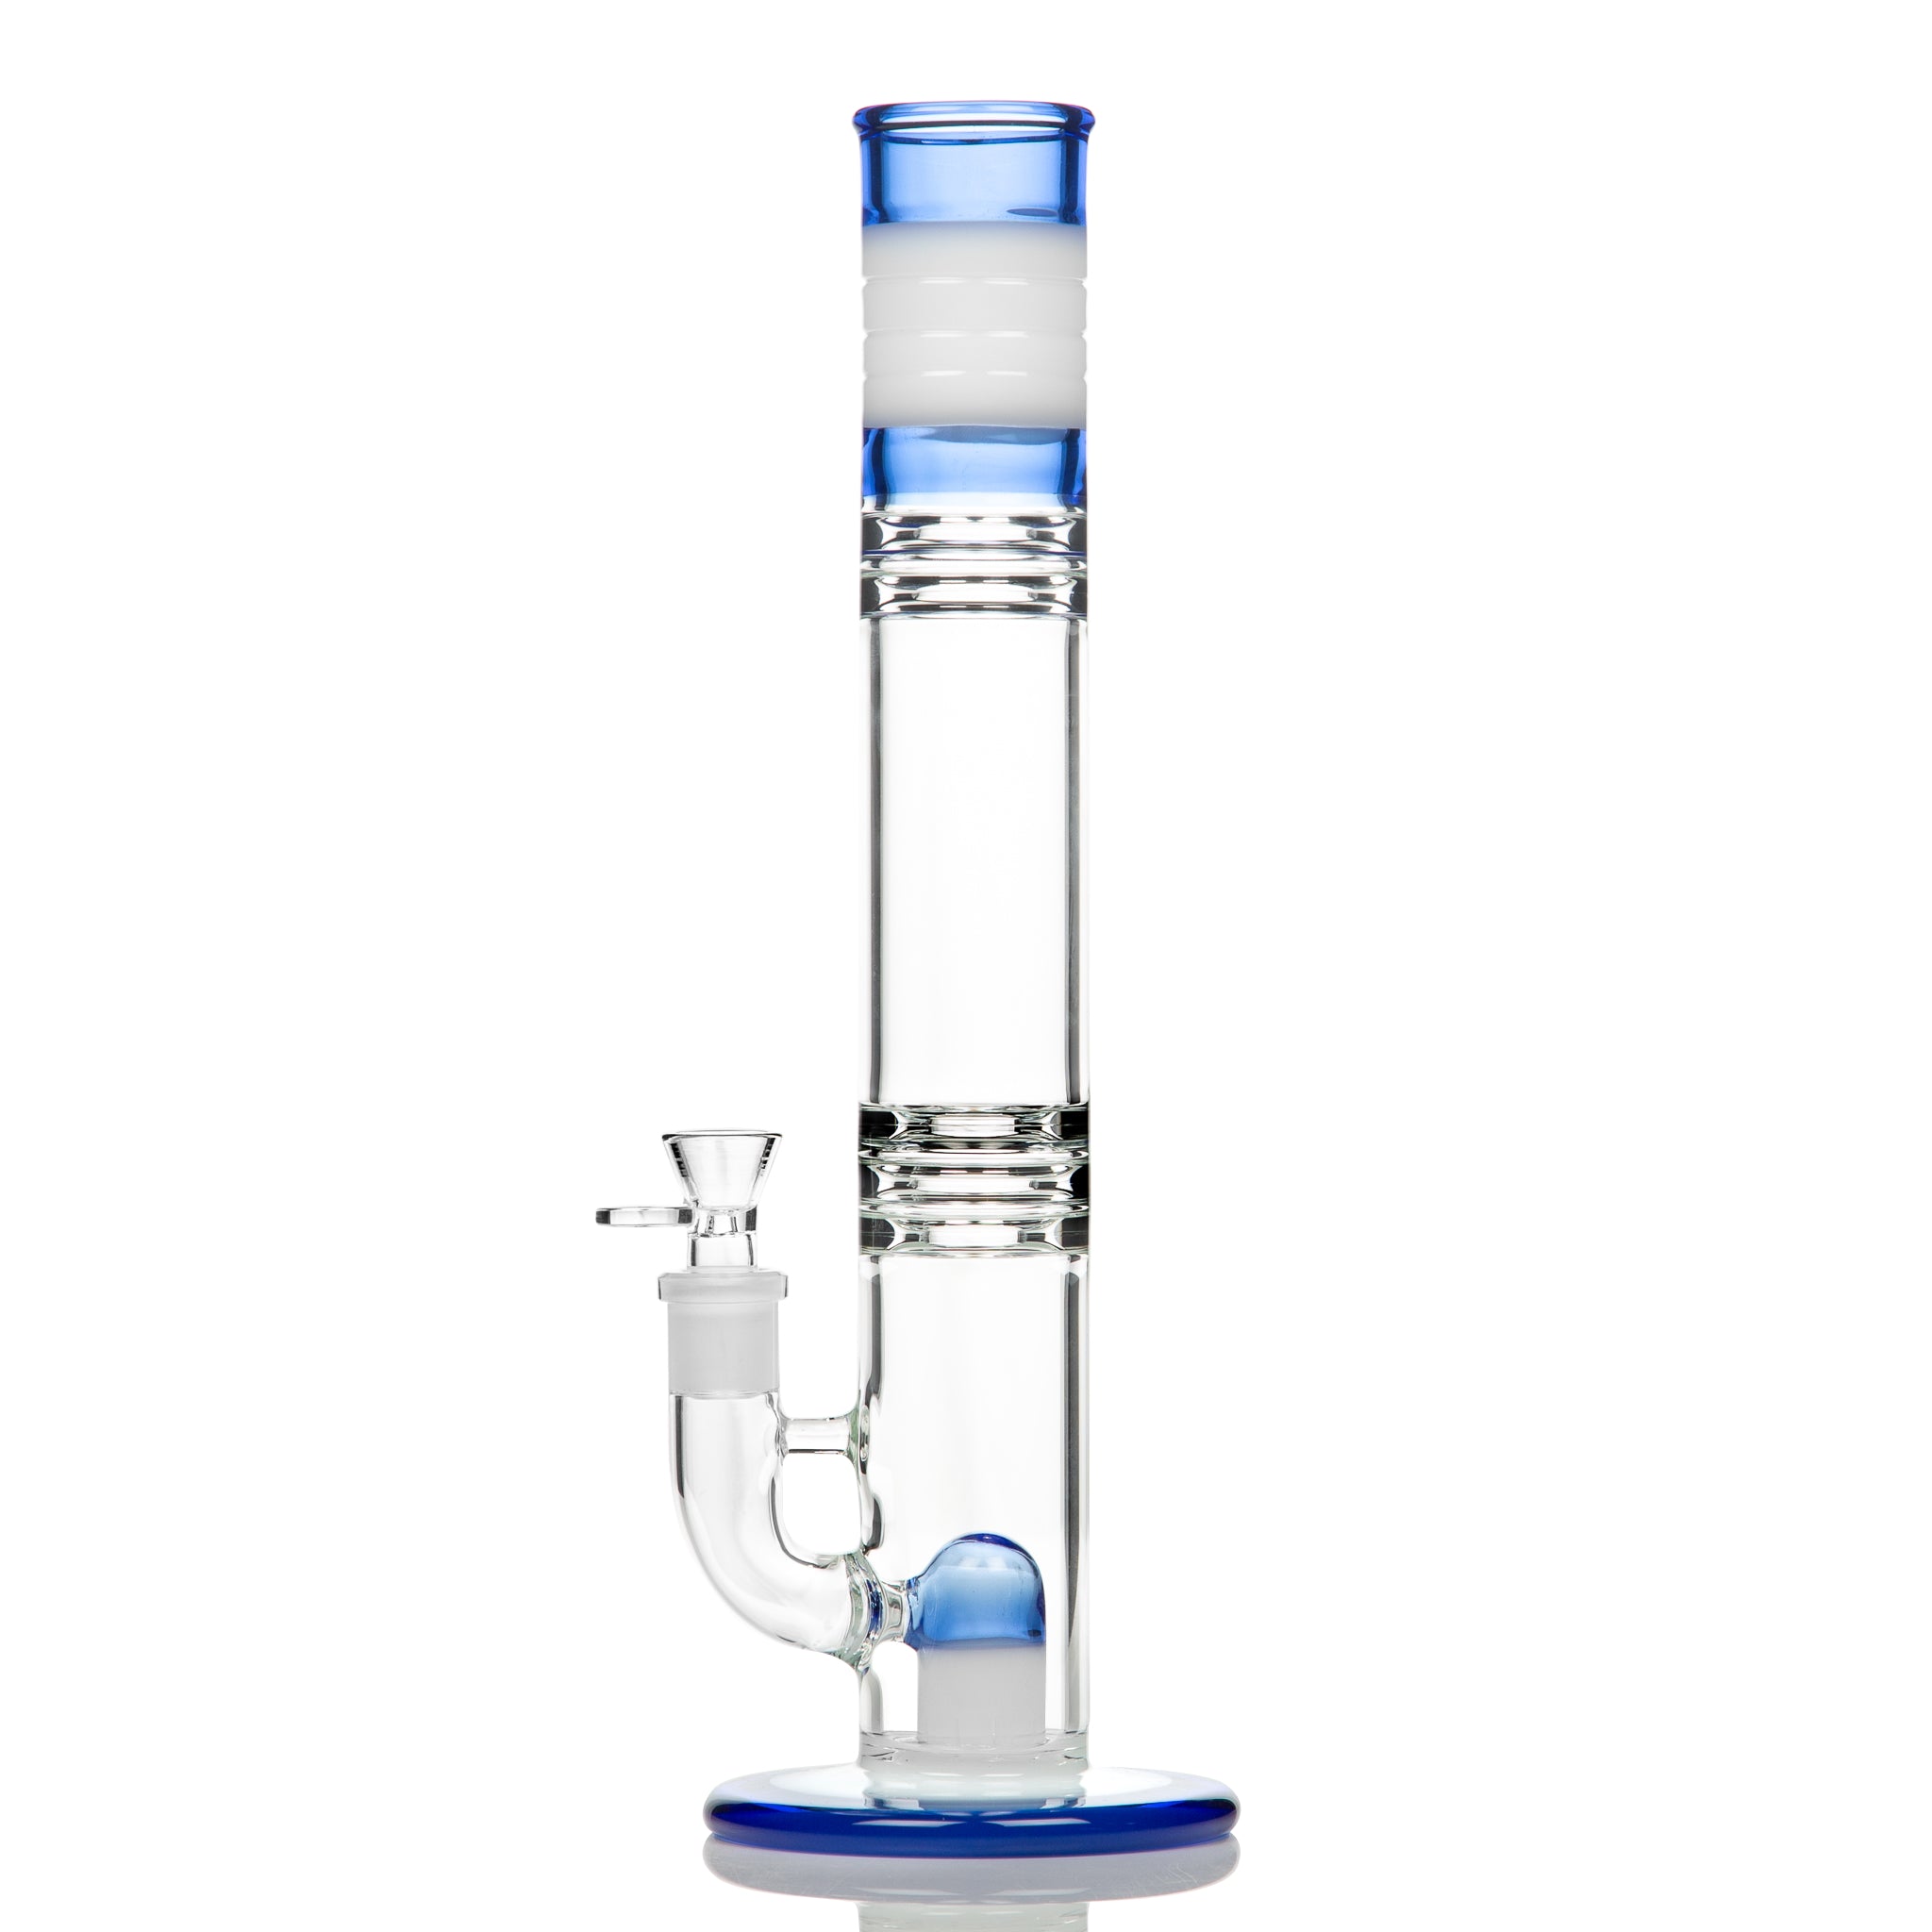 38cm straight glass bong with percolator.